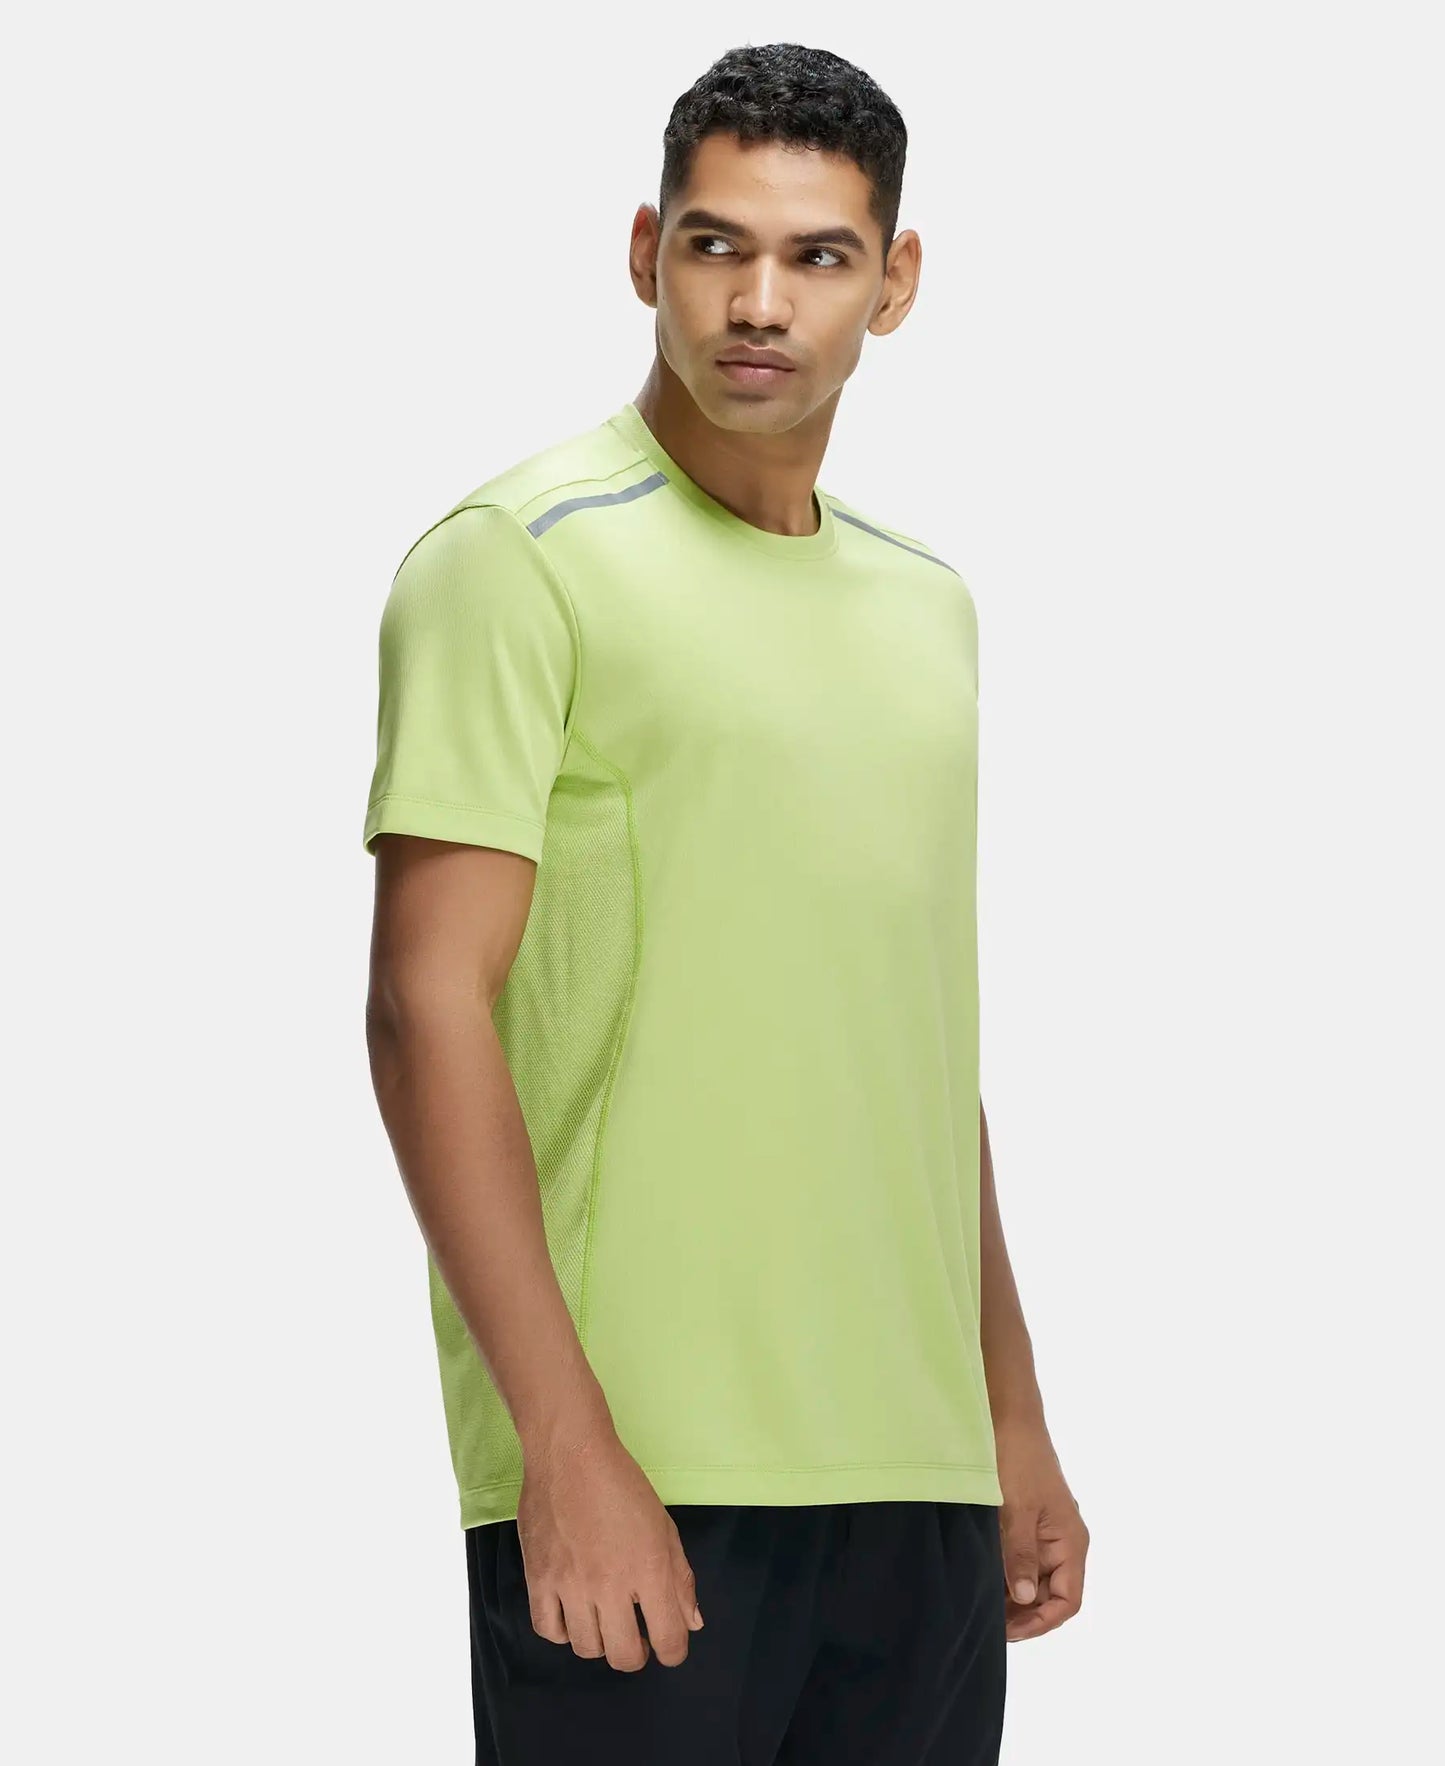 Recycled Microfiber Elastane Stretch Half Sleeve Round Neck T-Shirt with Breathable Mesh - Green Glow-2